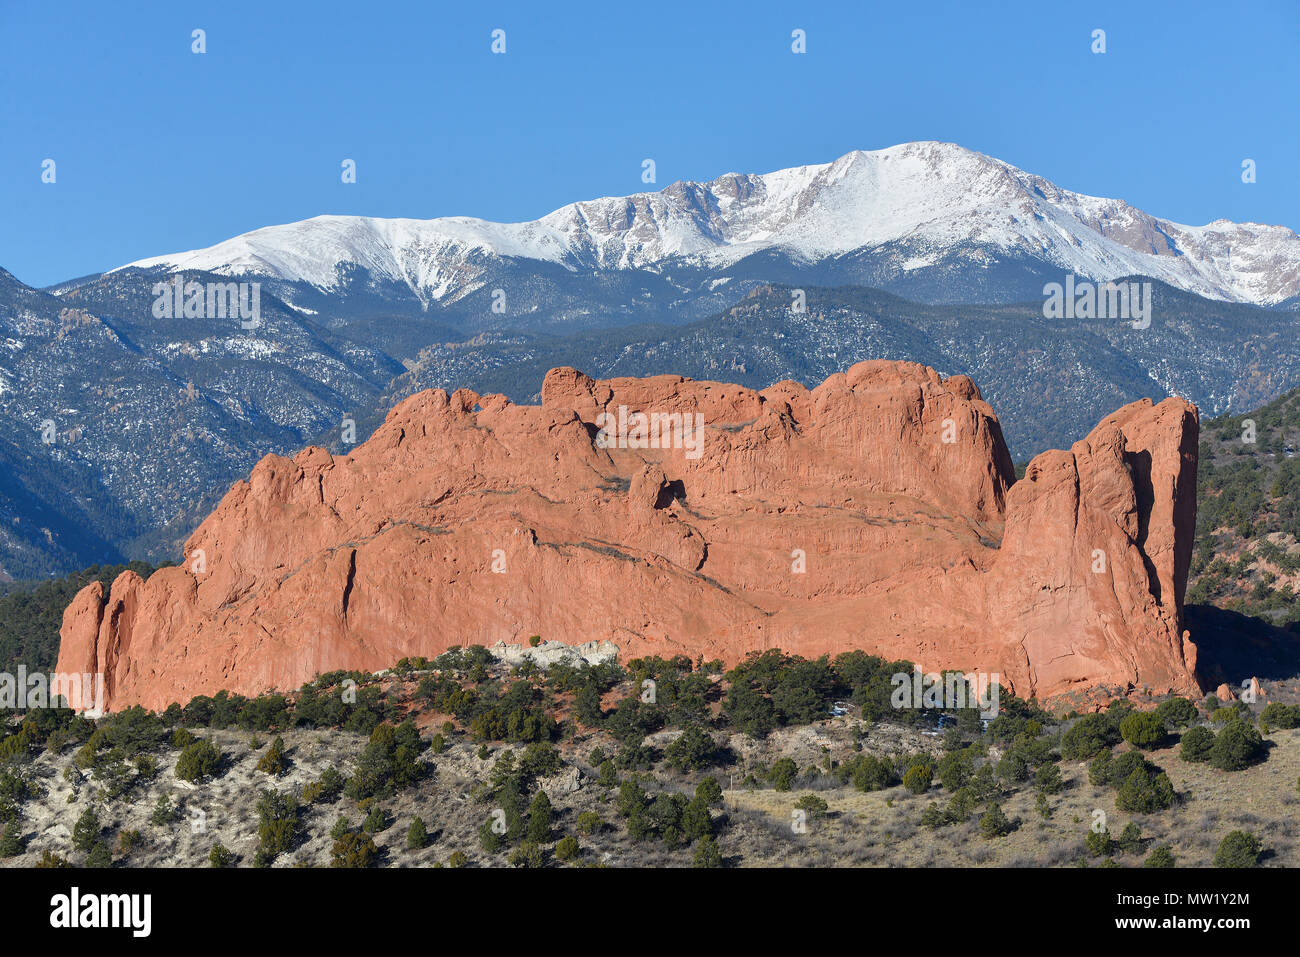 Garden of the Gods, North Gateway Rock, a natural formation, with snowcapped Pikes Peak in background, Colorado Springs, CO, USA Stock Photo